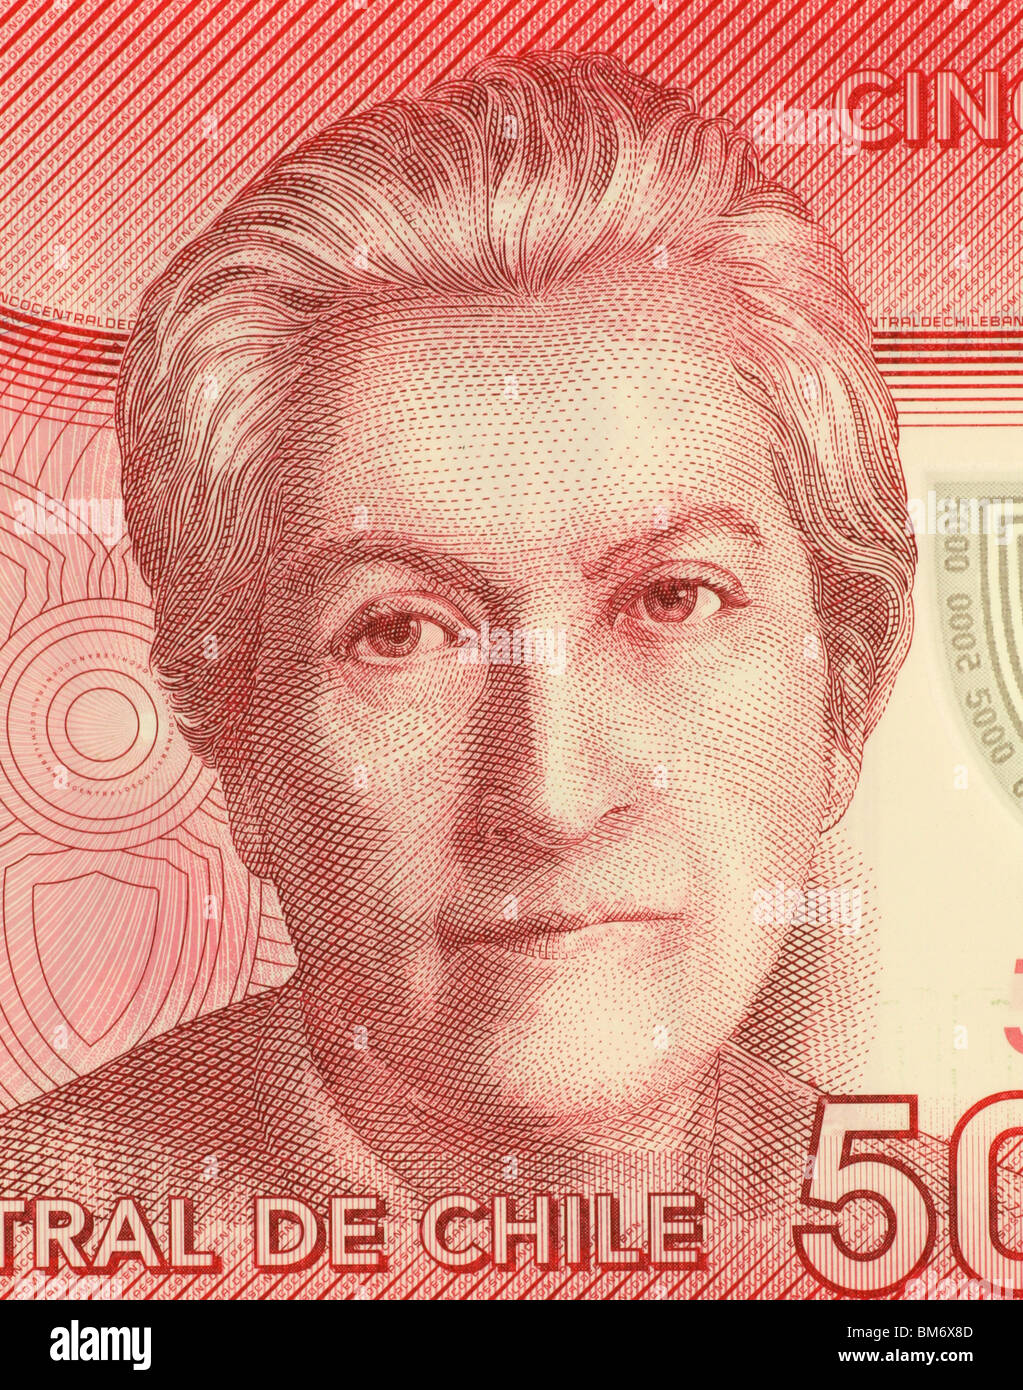 Gabriela Mistral (1889-1957) on 5000 Pesos 2009 Banknote from Chile. Chilean poet, educator, diplomat and feminist. Stock Photo